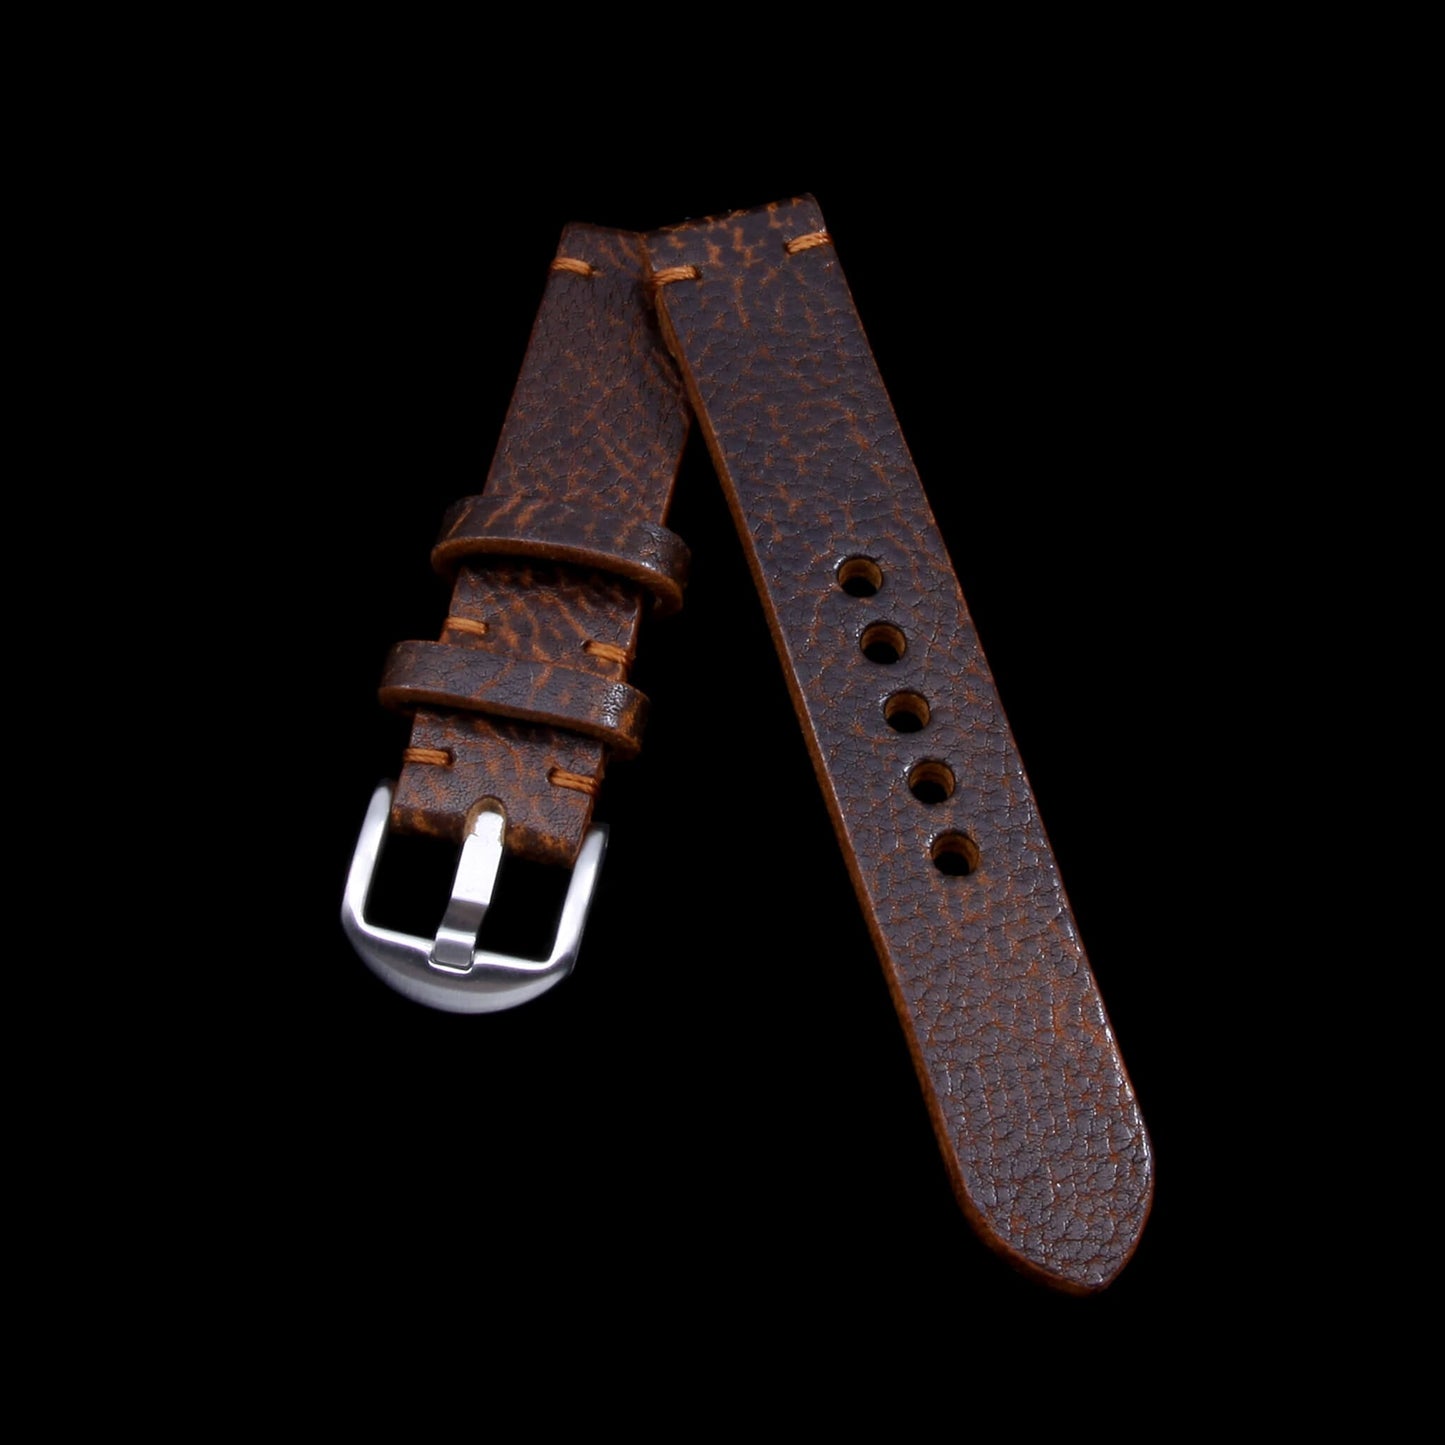 Rustic charm for your Apple Watch: Gobi Cognac leather strap, handcrafted in Italy for minimalist style